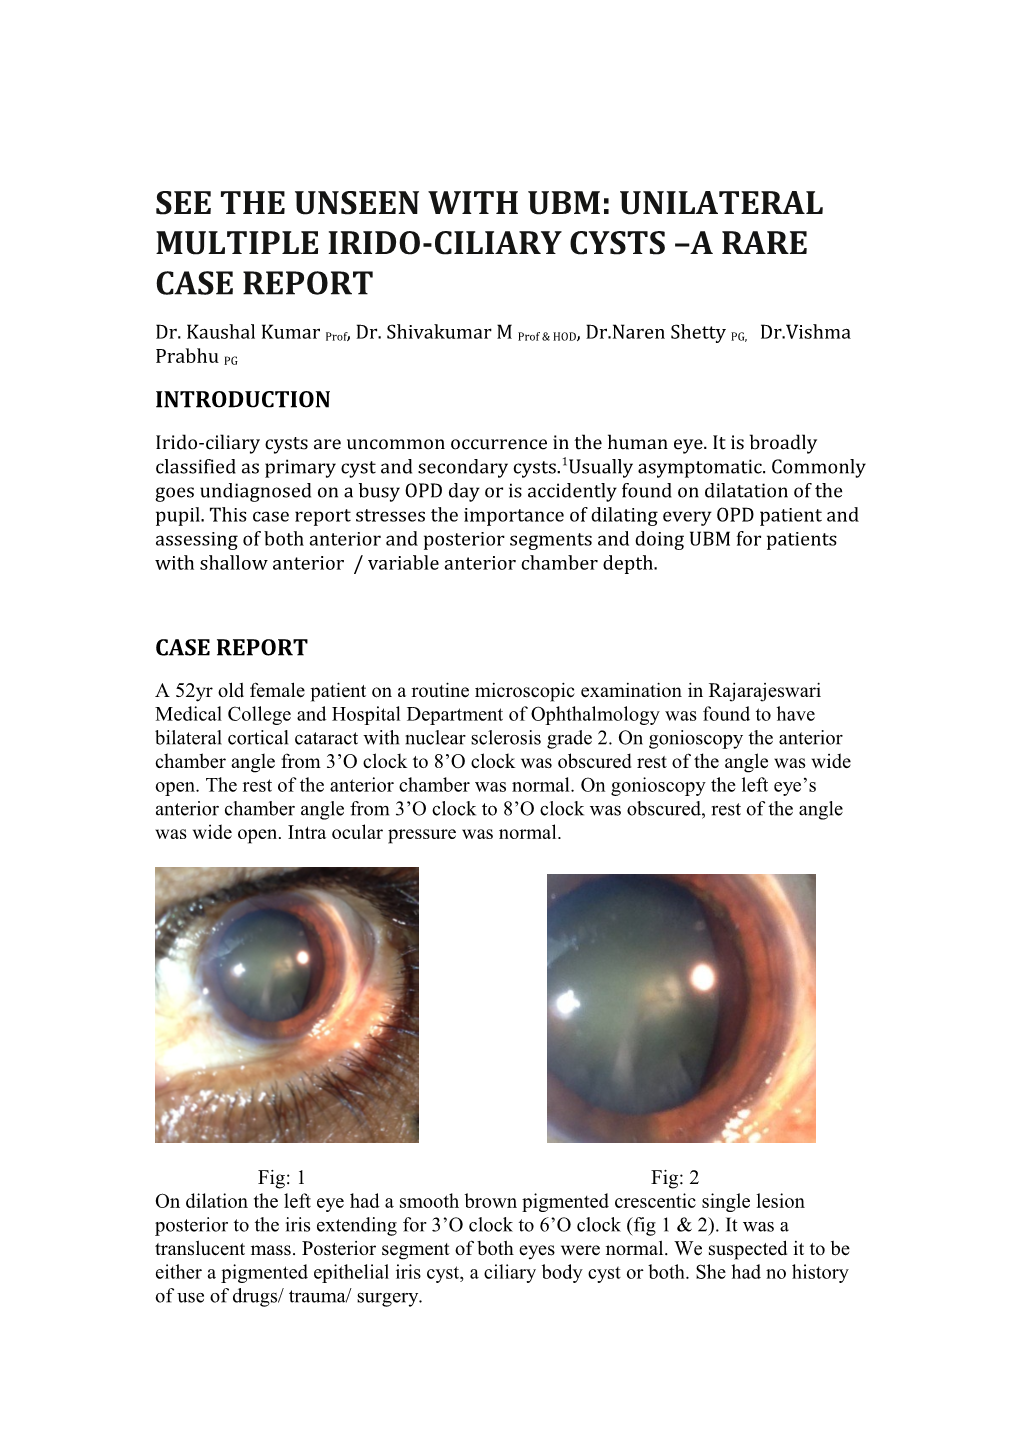 See the Unseen with Ubm: Unilateral Multiple Irido-Ciliary Cysts a Rare Case Report